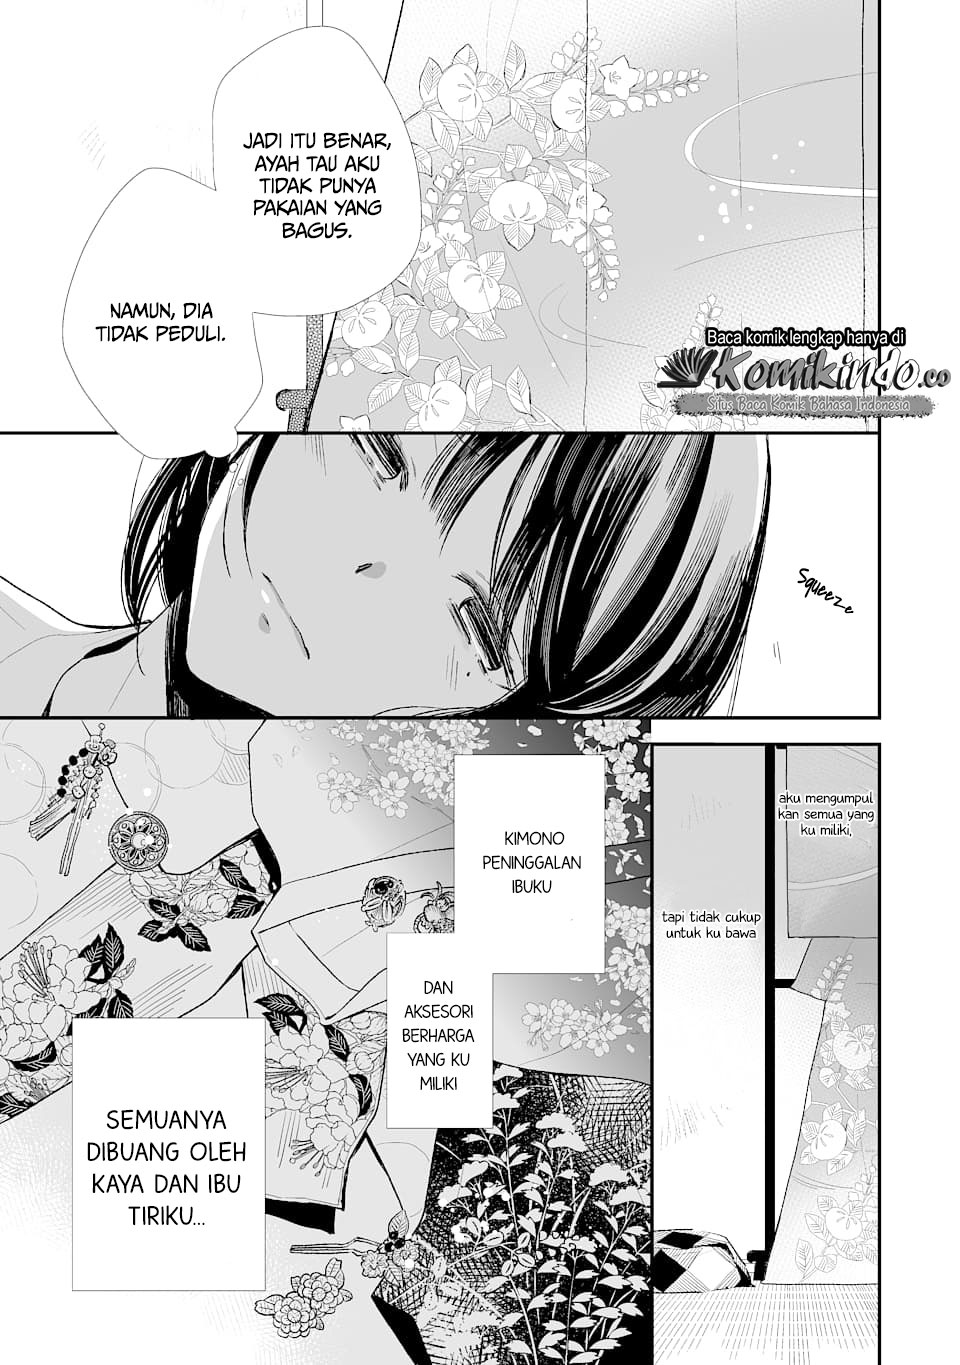 My Blissful Marriage Chapter 01